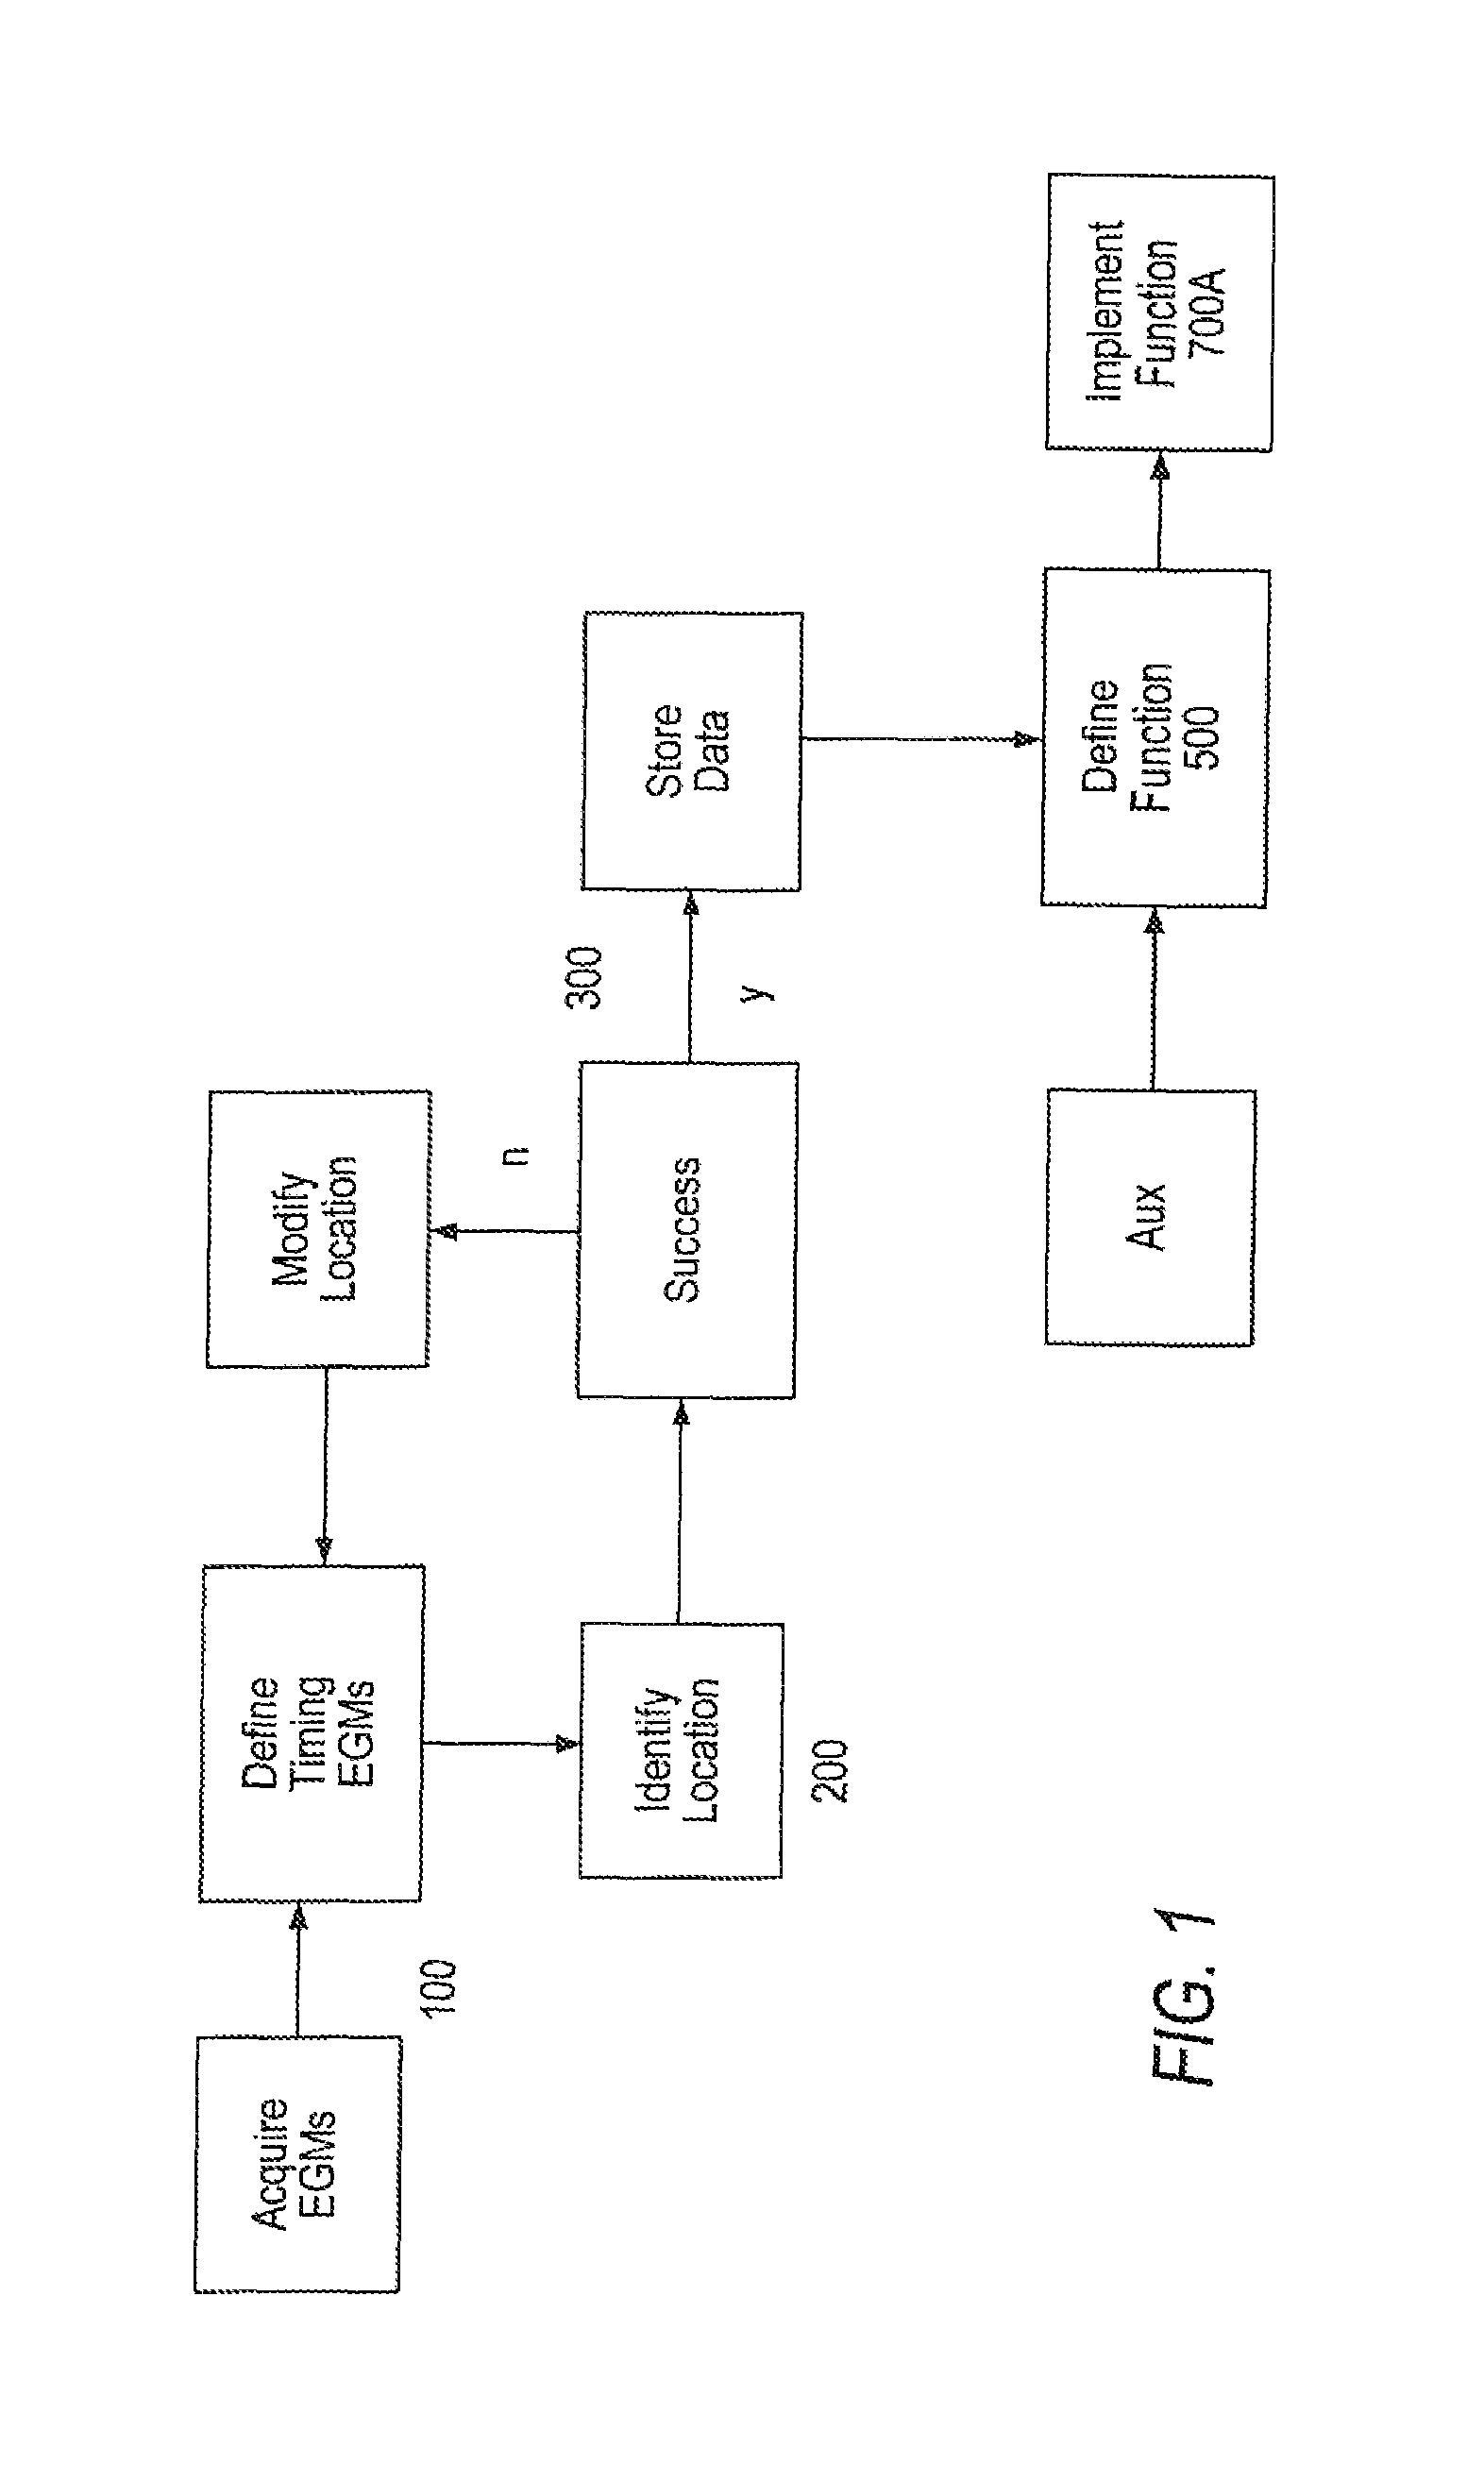 Method for guiding an ablation catheter based on real time intracardiac electrical signals and apparatus for performing the method